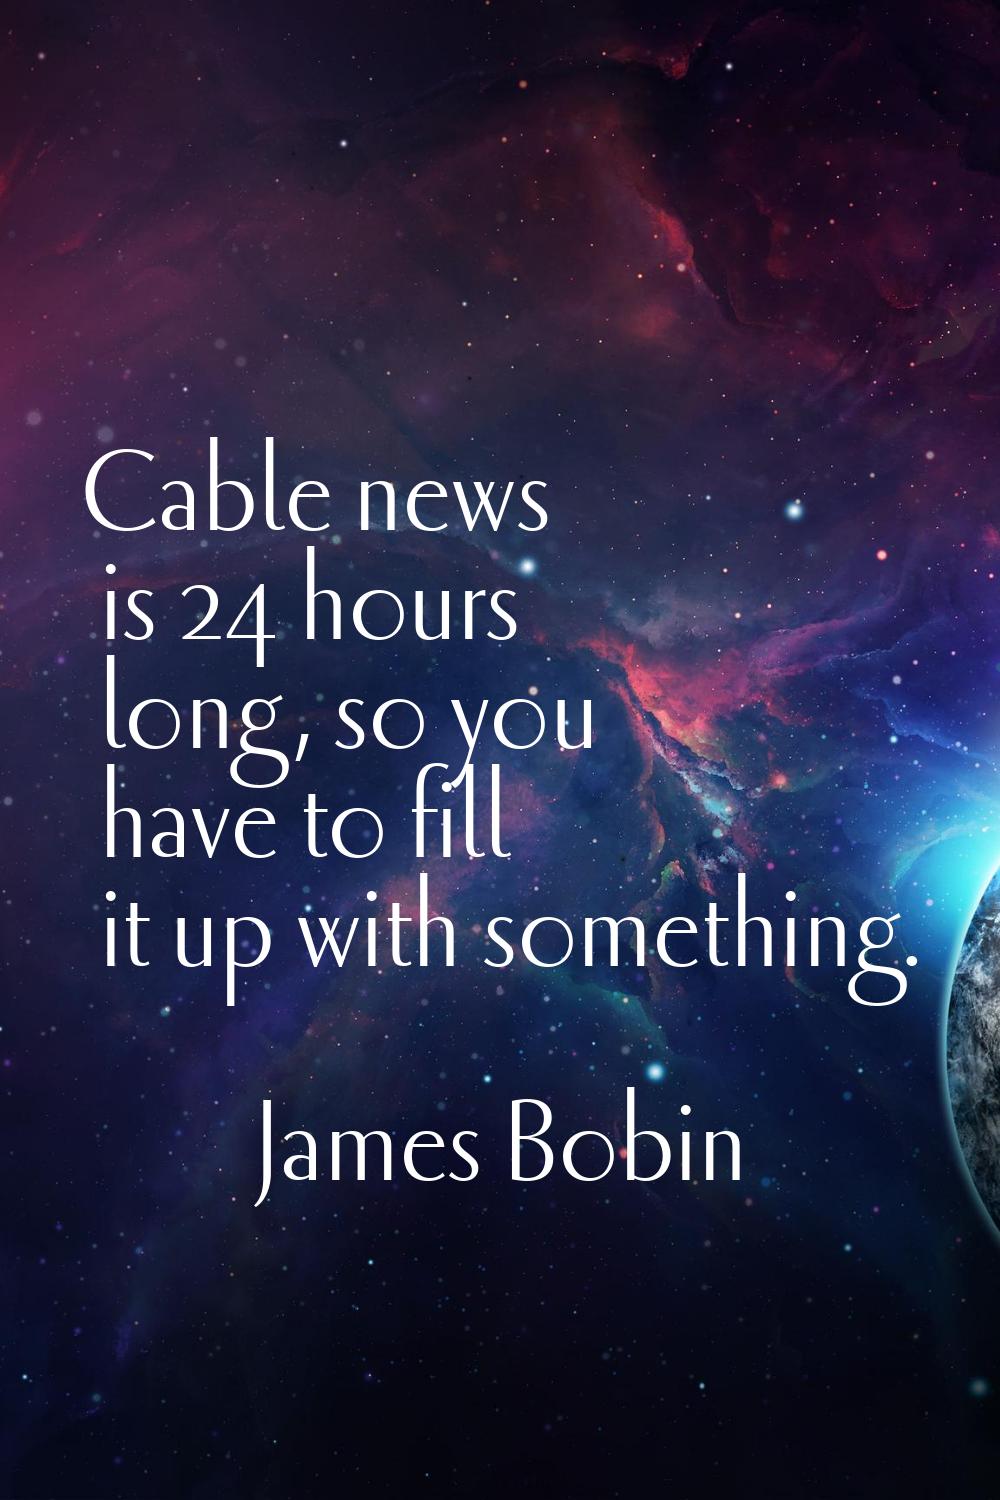 Cable news is 24 hours long, so you have to fill it up with something.